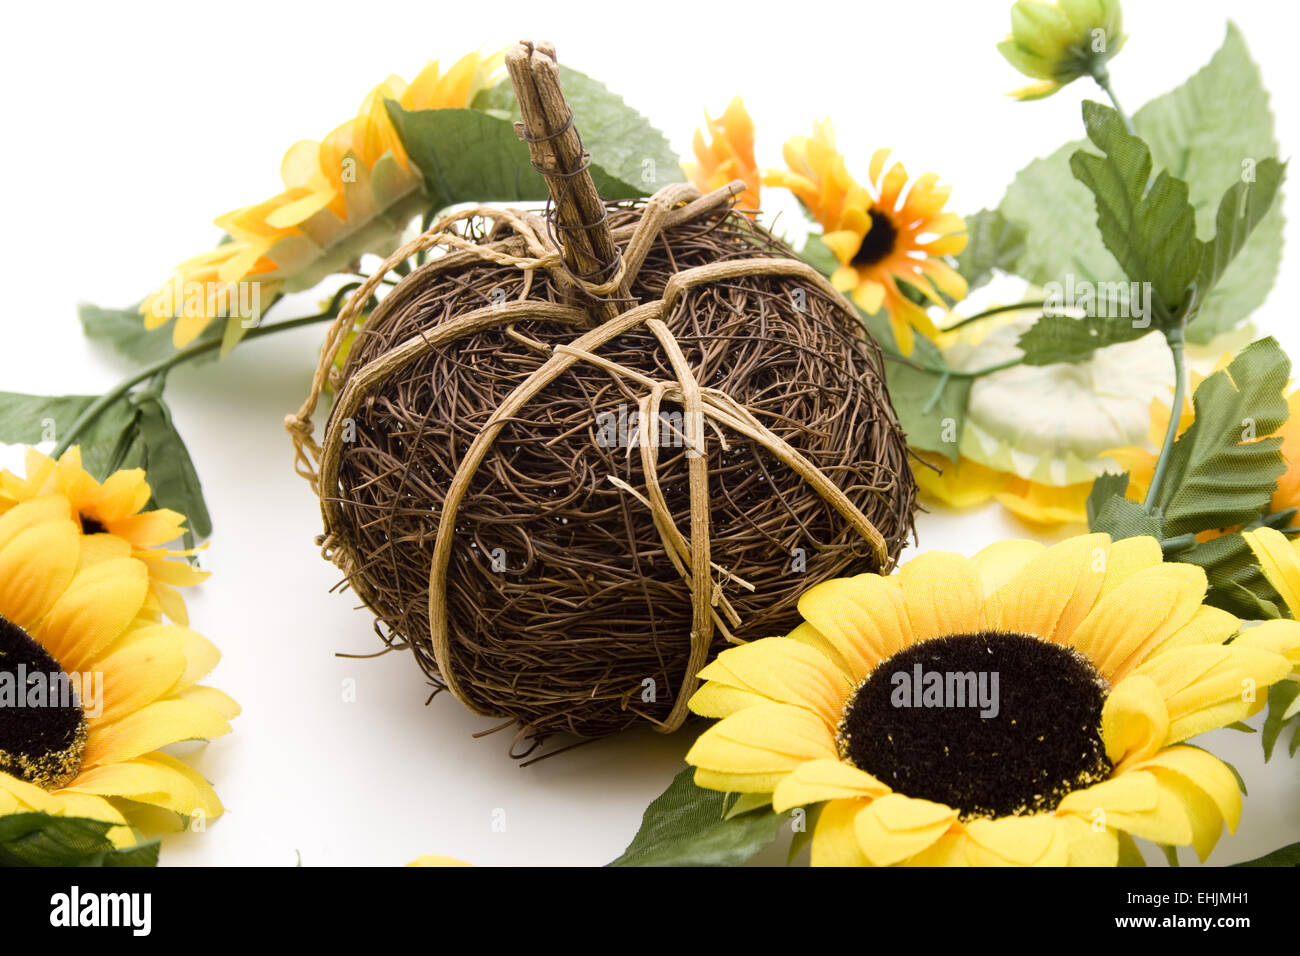 Straw sphere and sunflowers Stock Photo